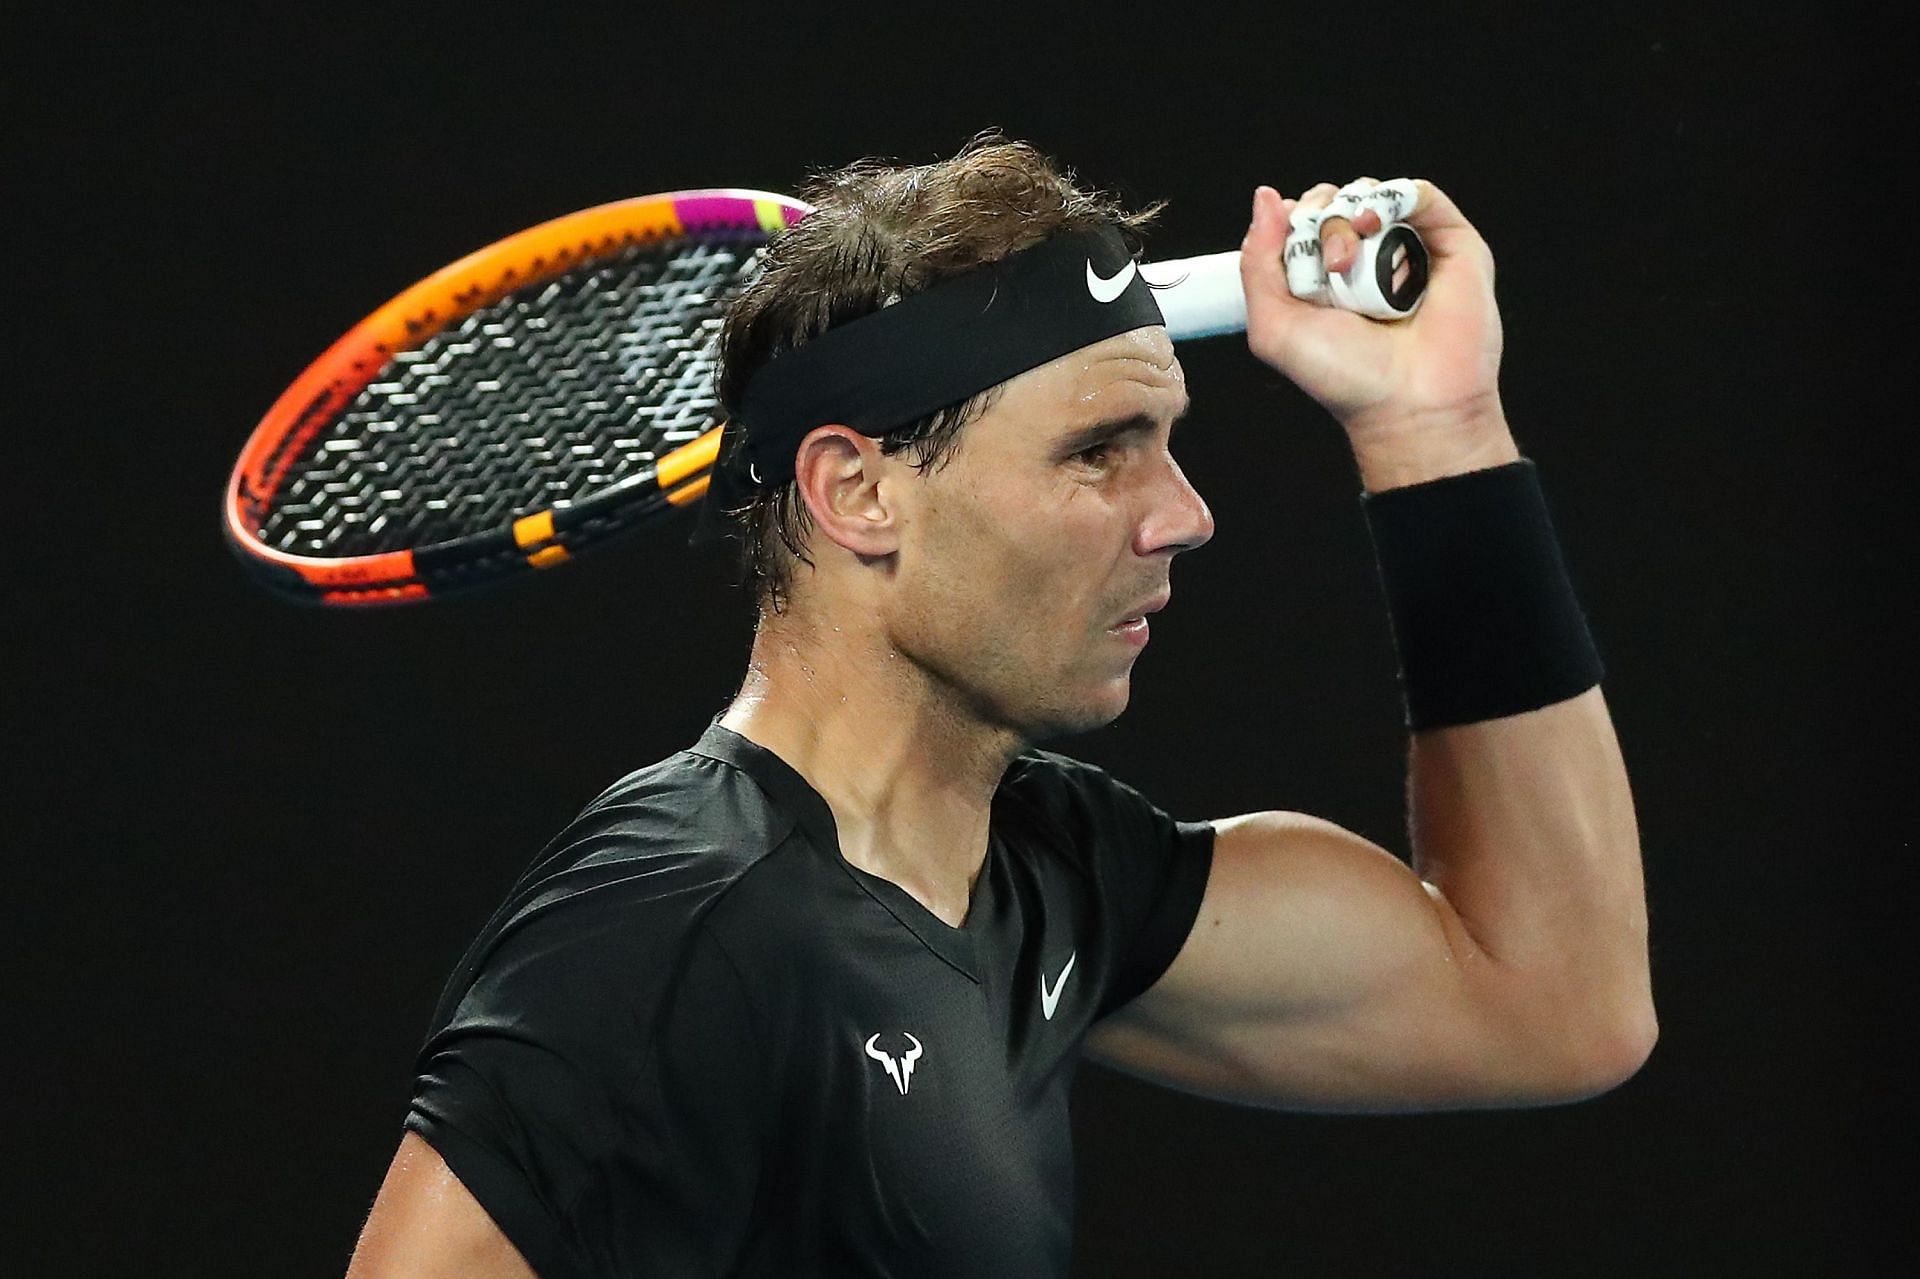 Rafael Nadal unloads on a forehand at the Melbourne Summer Set 2022